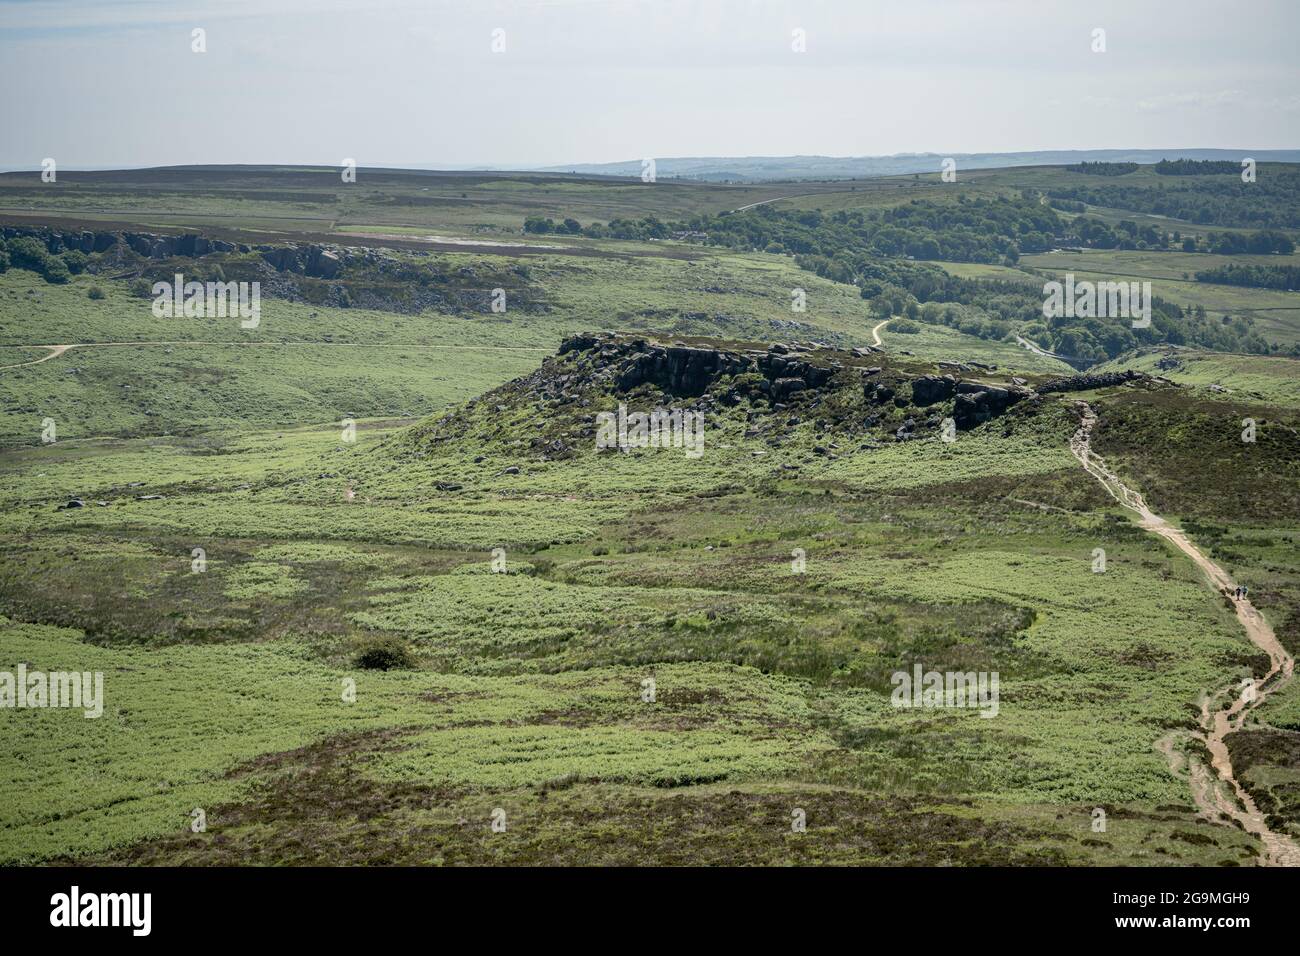 View of the ancient Iron Age hill fort Carl Wark from Higger Tor in the Peak District National Park, Derbyshire, UK. Stock Photo